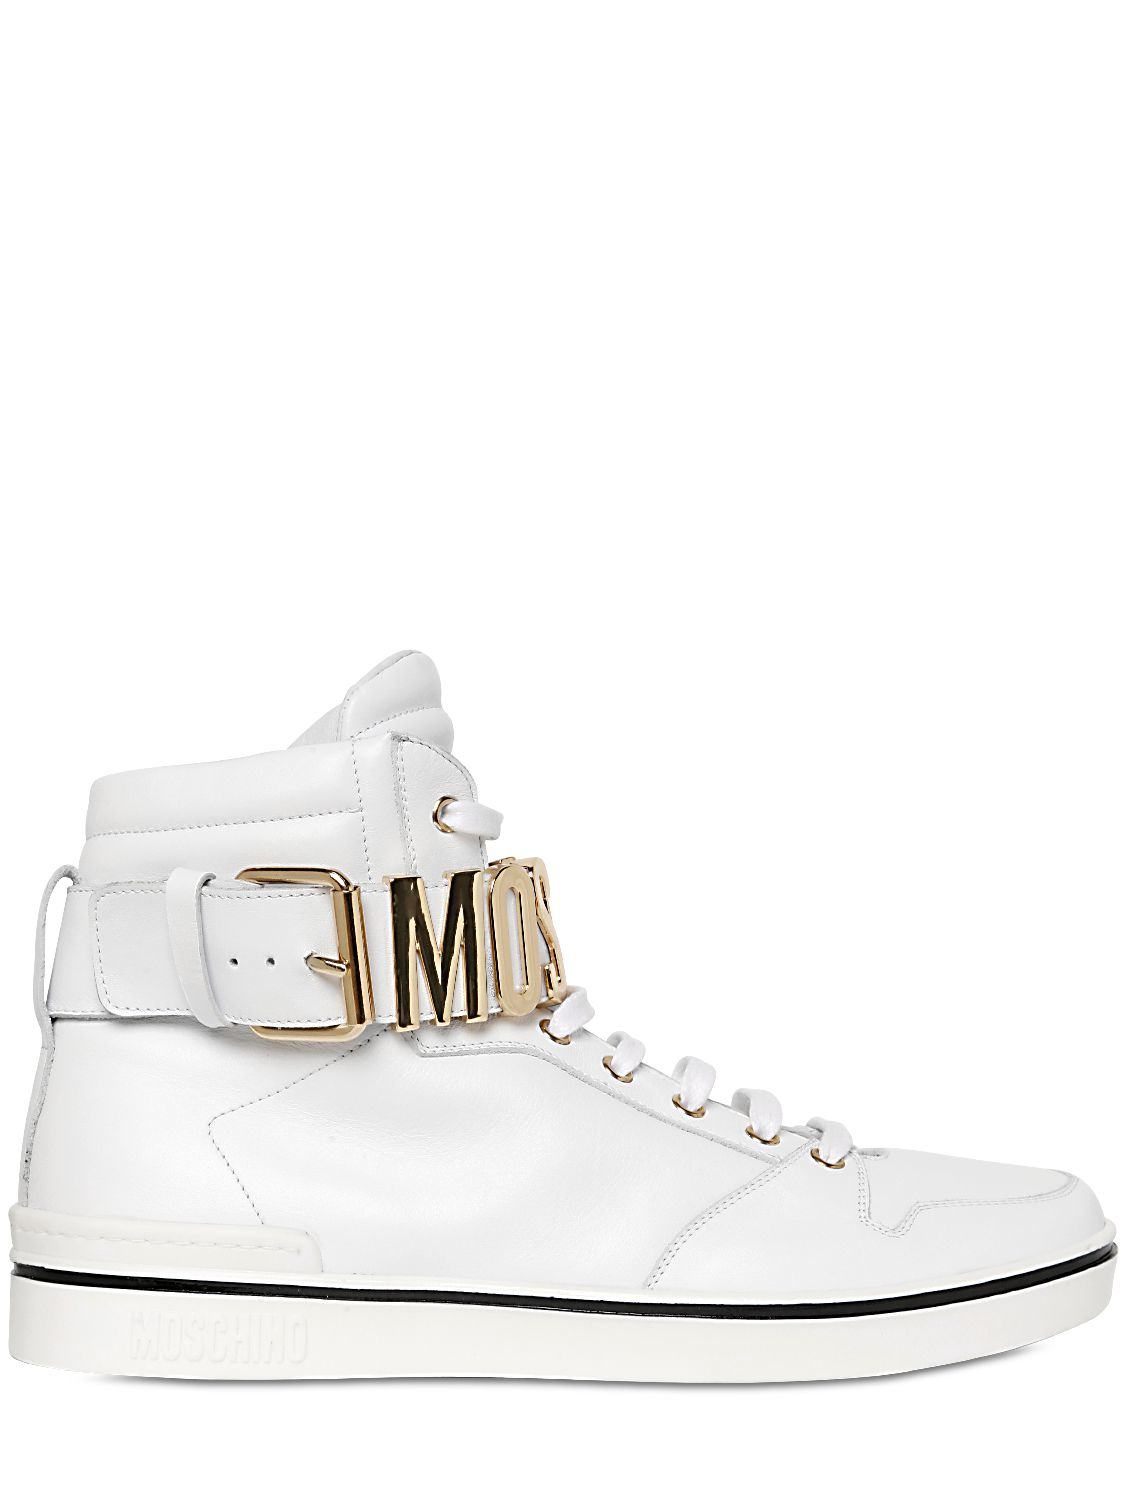 Lyst - Moschino Logo Lettering Leather High Top Sneakers in White